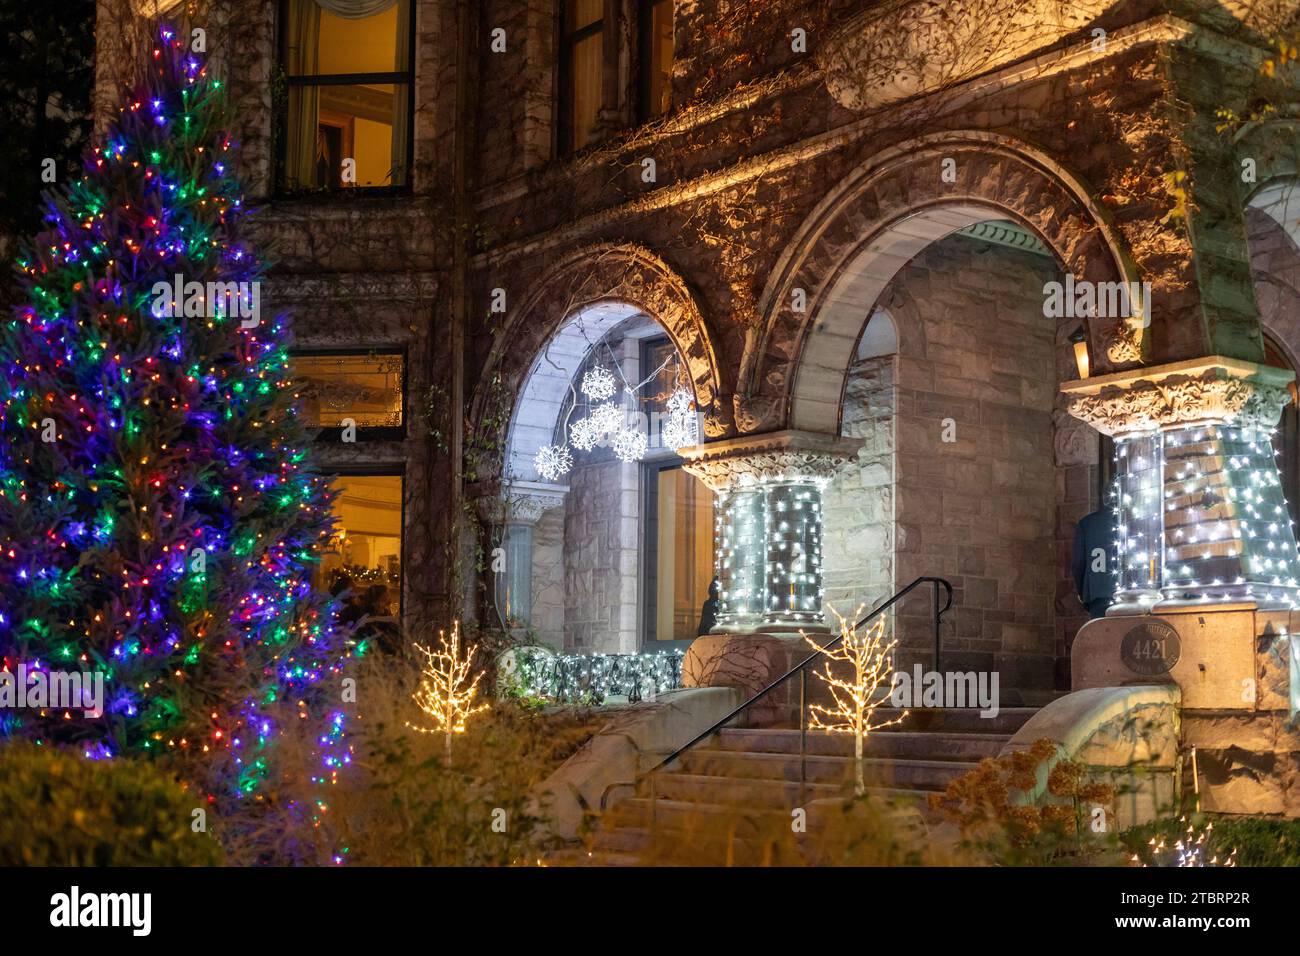 Detroit, Michigan - The Whitney, an upscale restaurant decorated for the holidays. The mansion was built in 1894 by David Whitney Jr, a lumber baron w Stock Photo